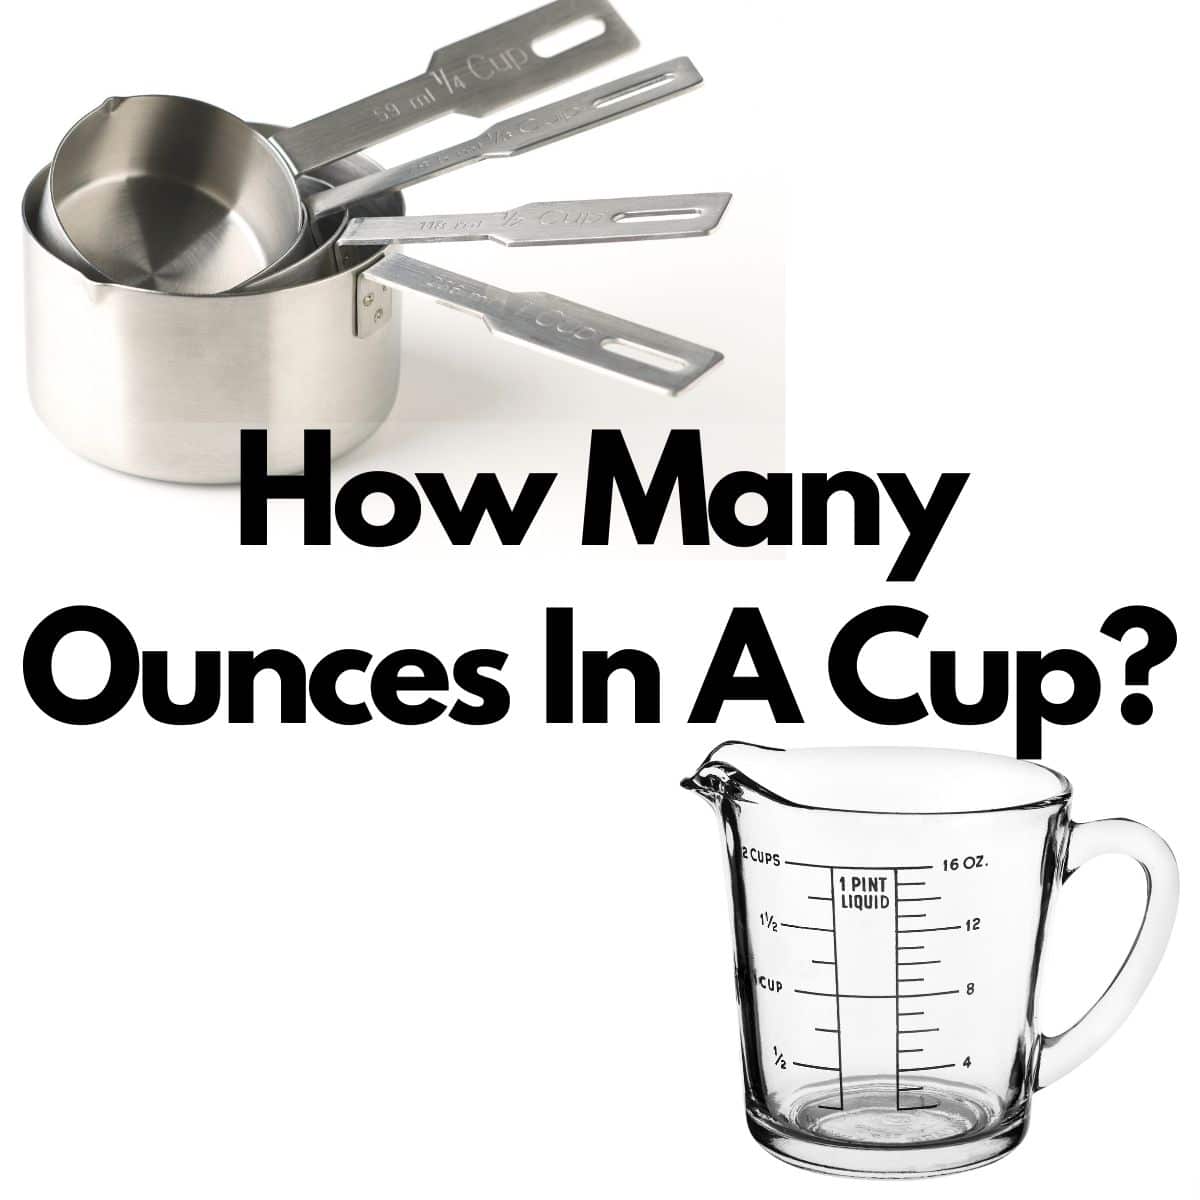 https://www.foodlovinfamily.com/wp-content/uploads/2022/04/how-many-ounces-in-a-cup.jpg